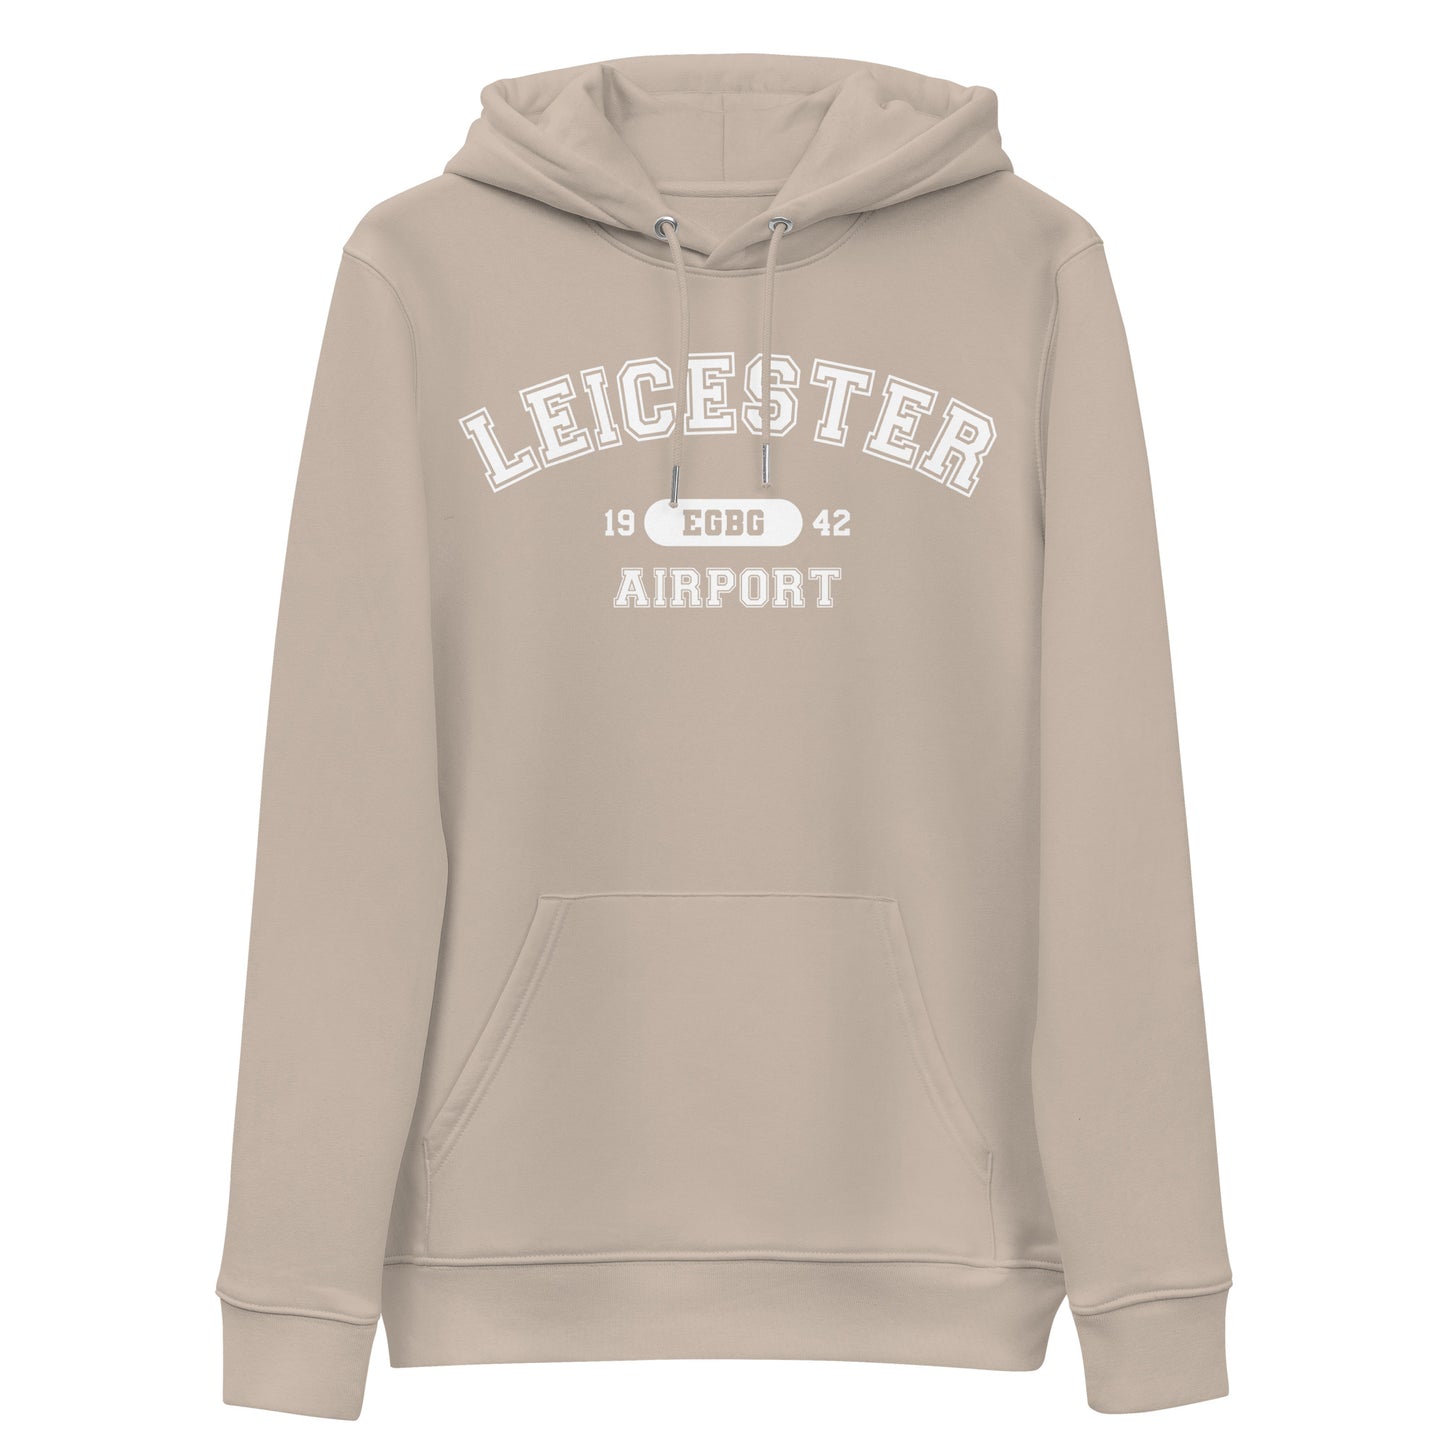 Leicester Airport with ICAO code in collegiate style. Unisex essential eco hoodie.